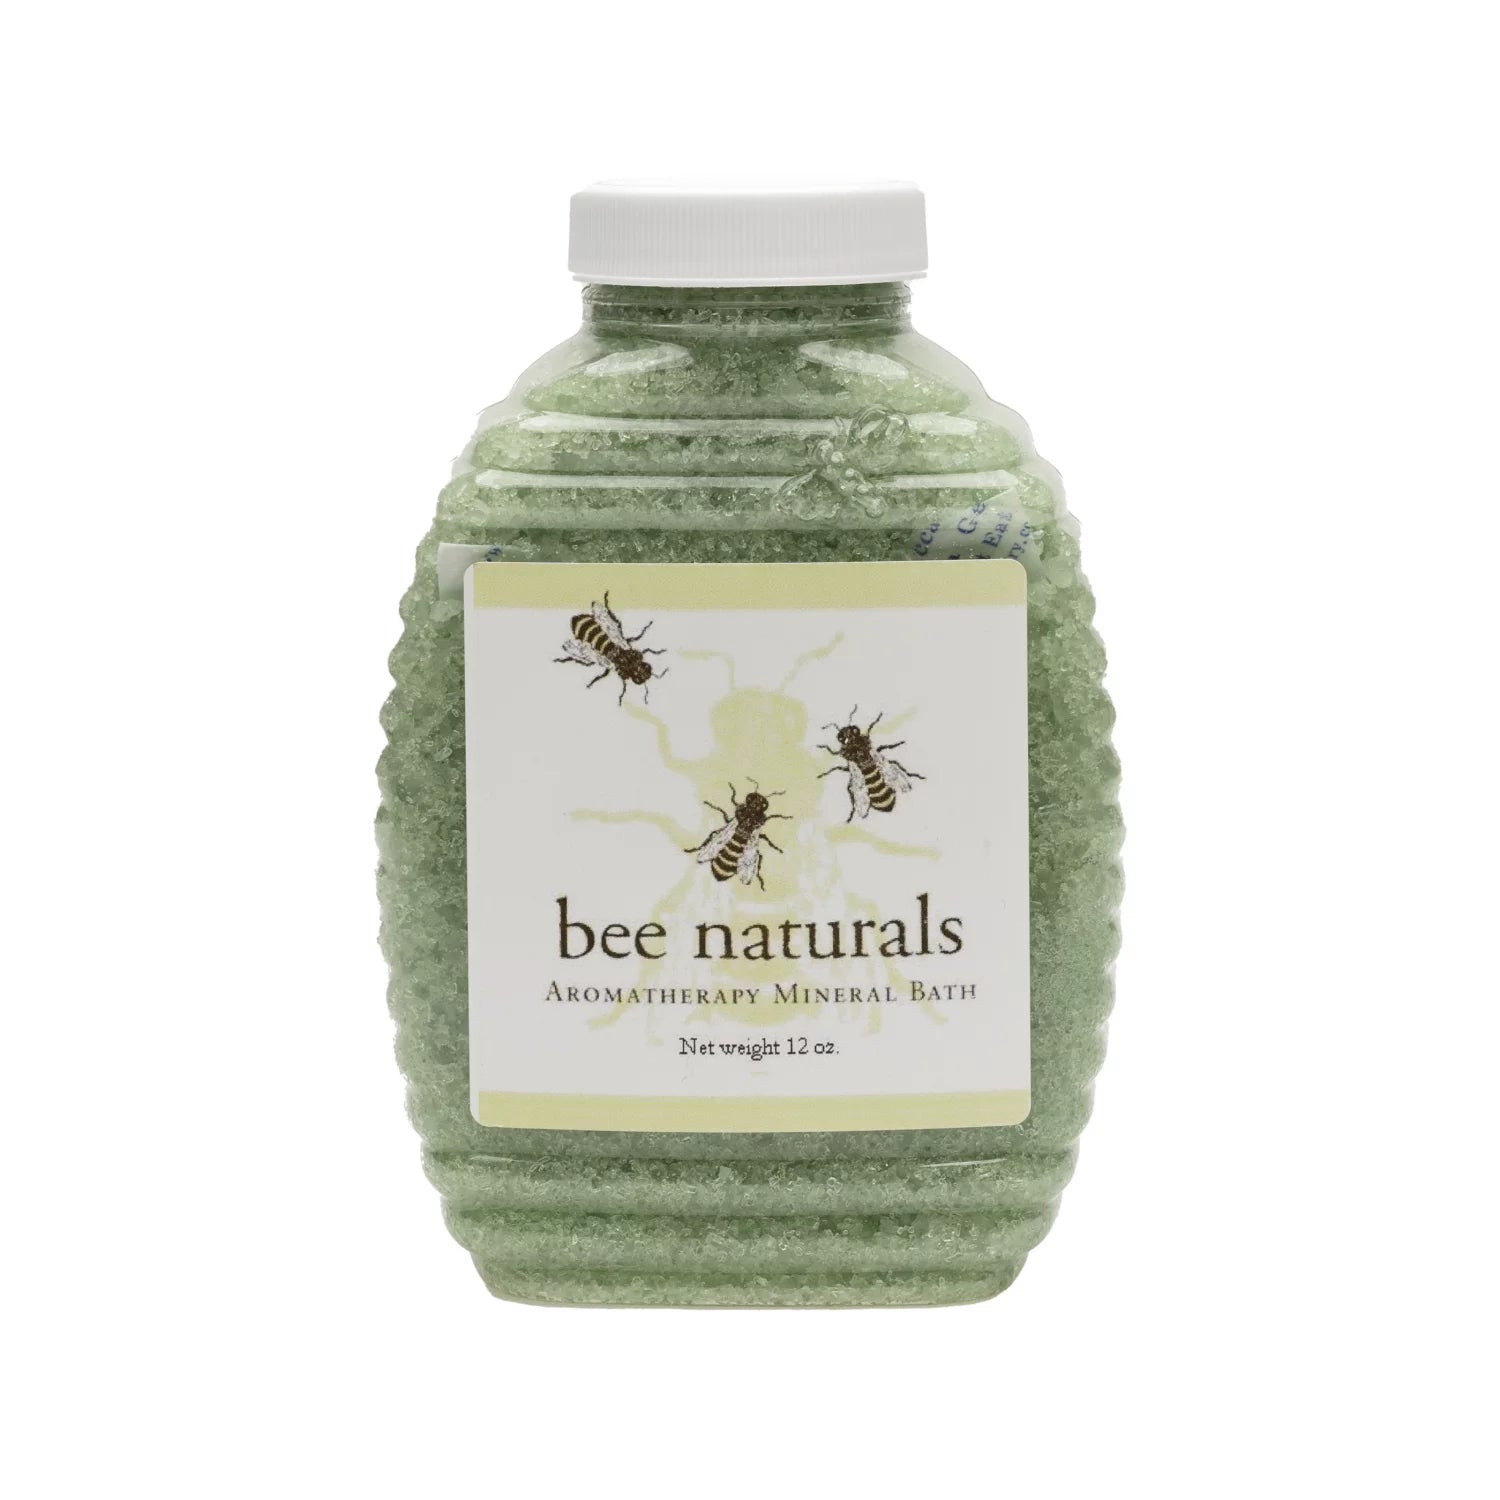 Aromatherapy Mineral Bath - Bee Naturals Store